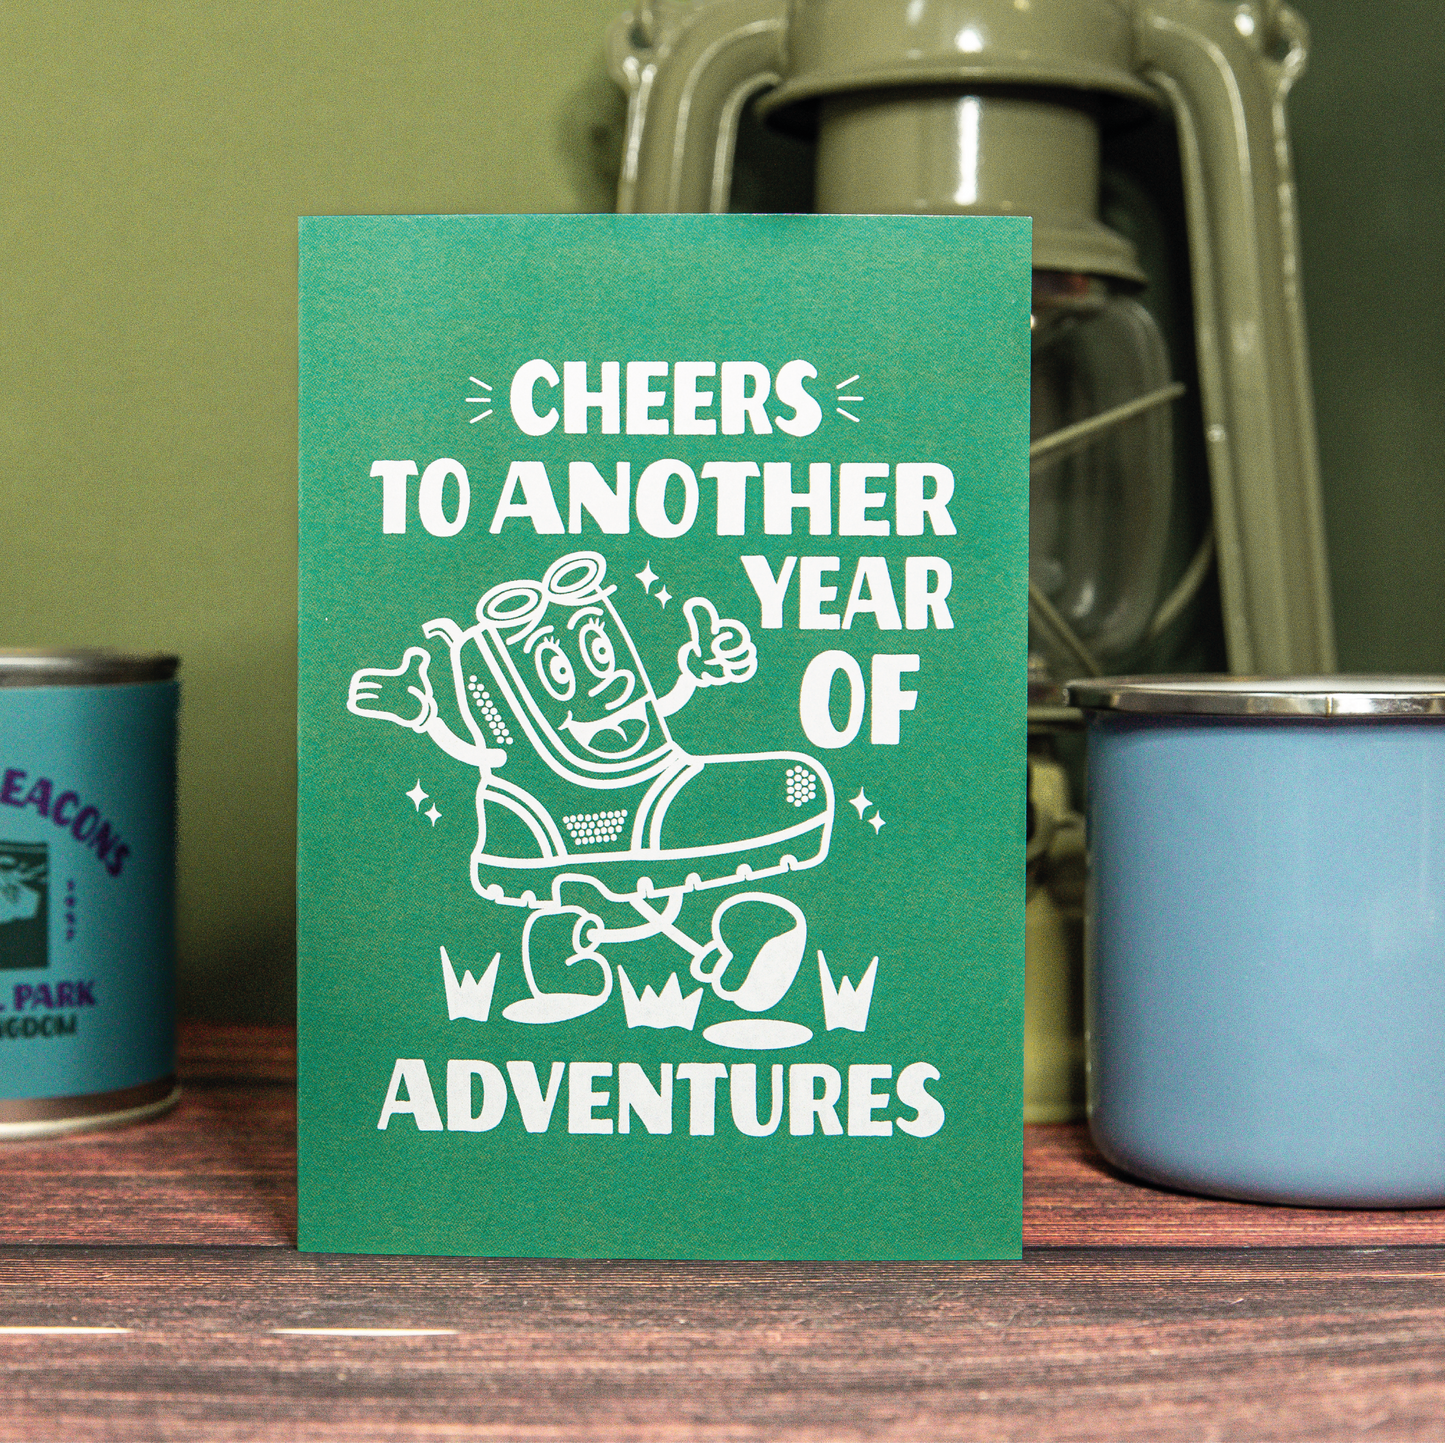 'Cheers to another year of adventures' hiking card